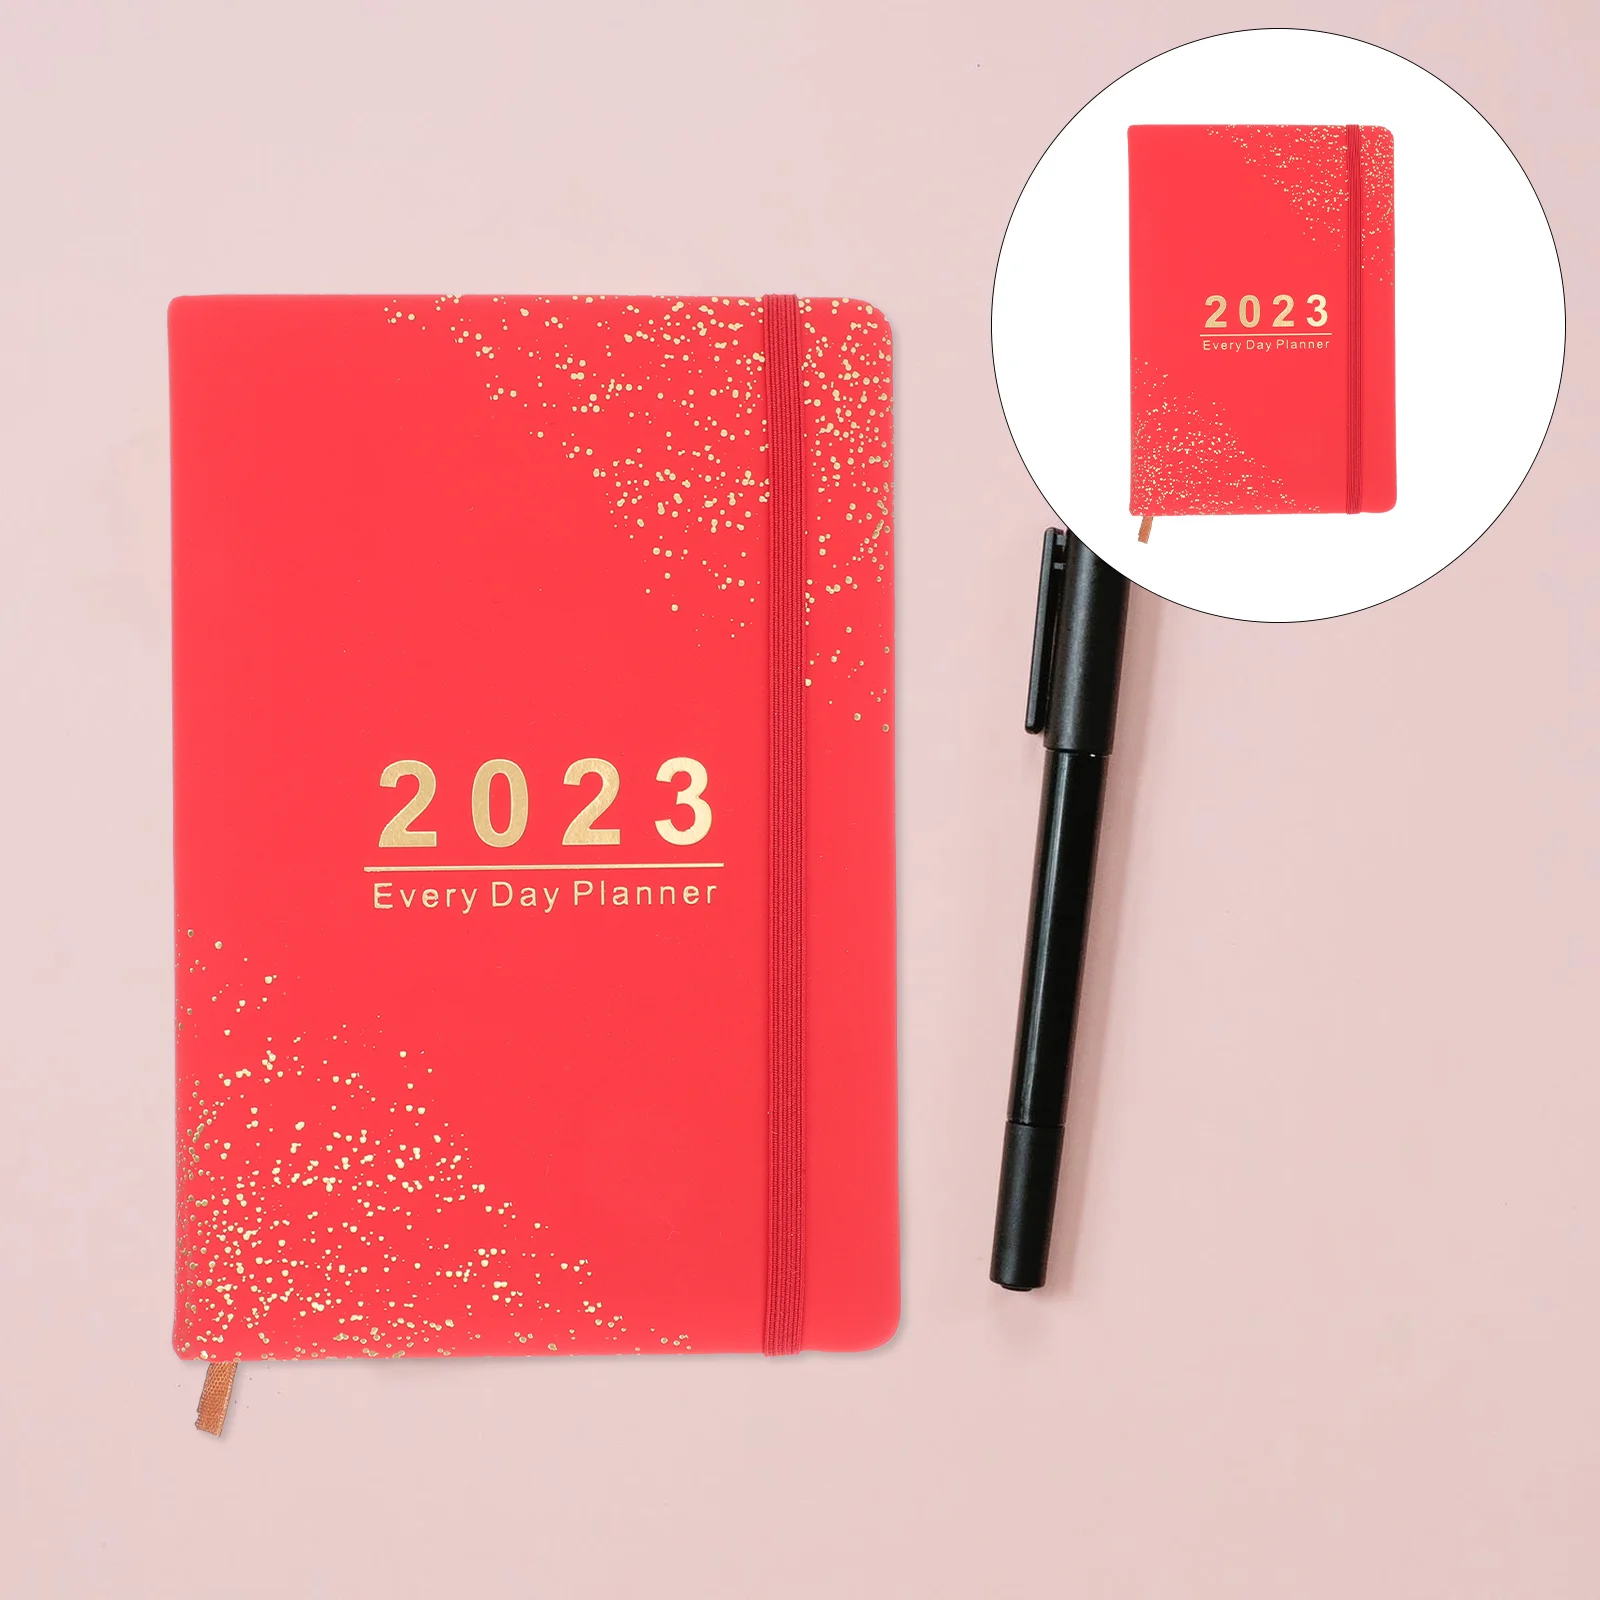 

Planner Book Notebook 2023 Appointment Daily June Diarydo List Page Per Day Calendar Portable Agenda Planners Planning Notebooks